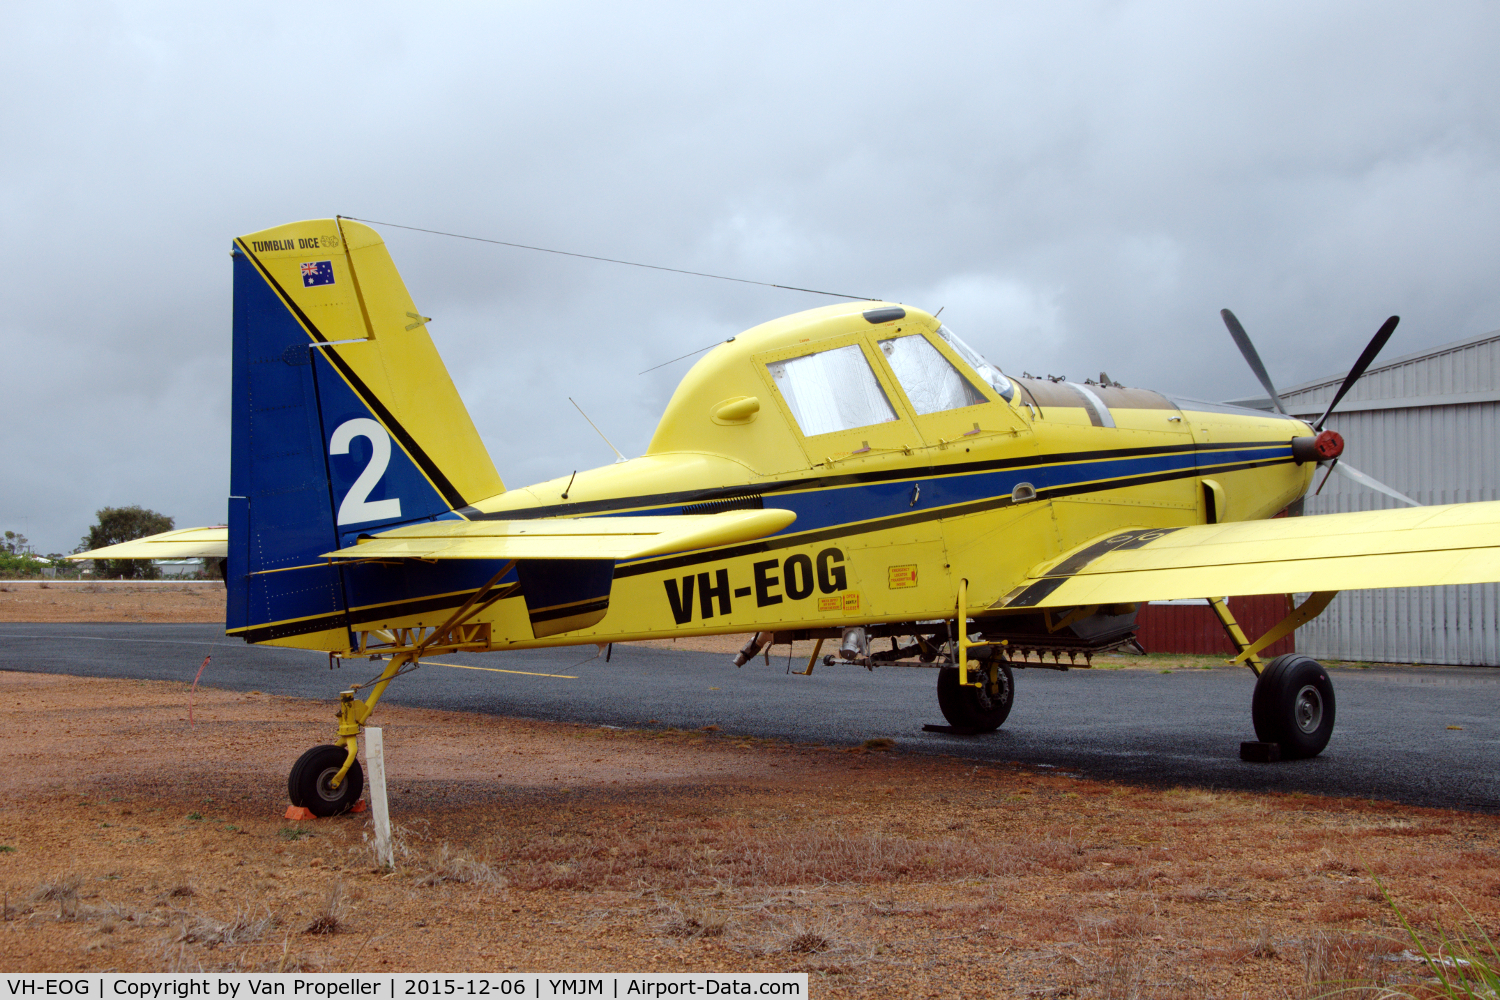 VH-EOG, 2004 Air Tractor Inc AT-802 C/N 802-0185, Air Tractor AT-802 firebomber parked at Manjimup airport, Western Australia